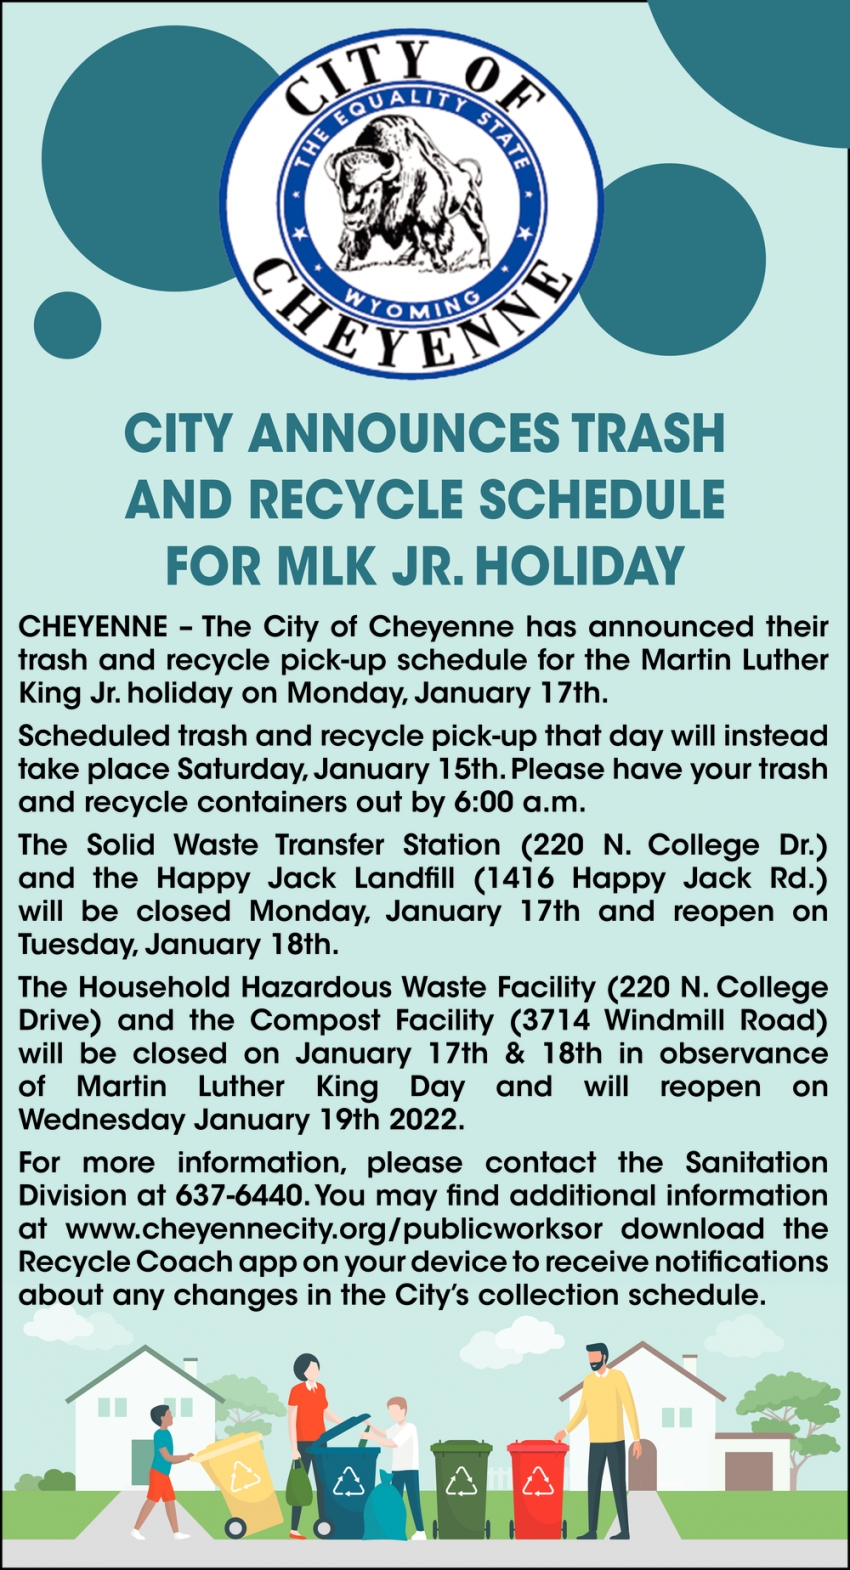 City Announces Trash and Recycle Schedule for MLK Jr. Holiday